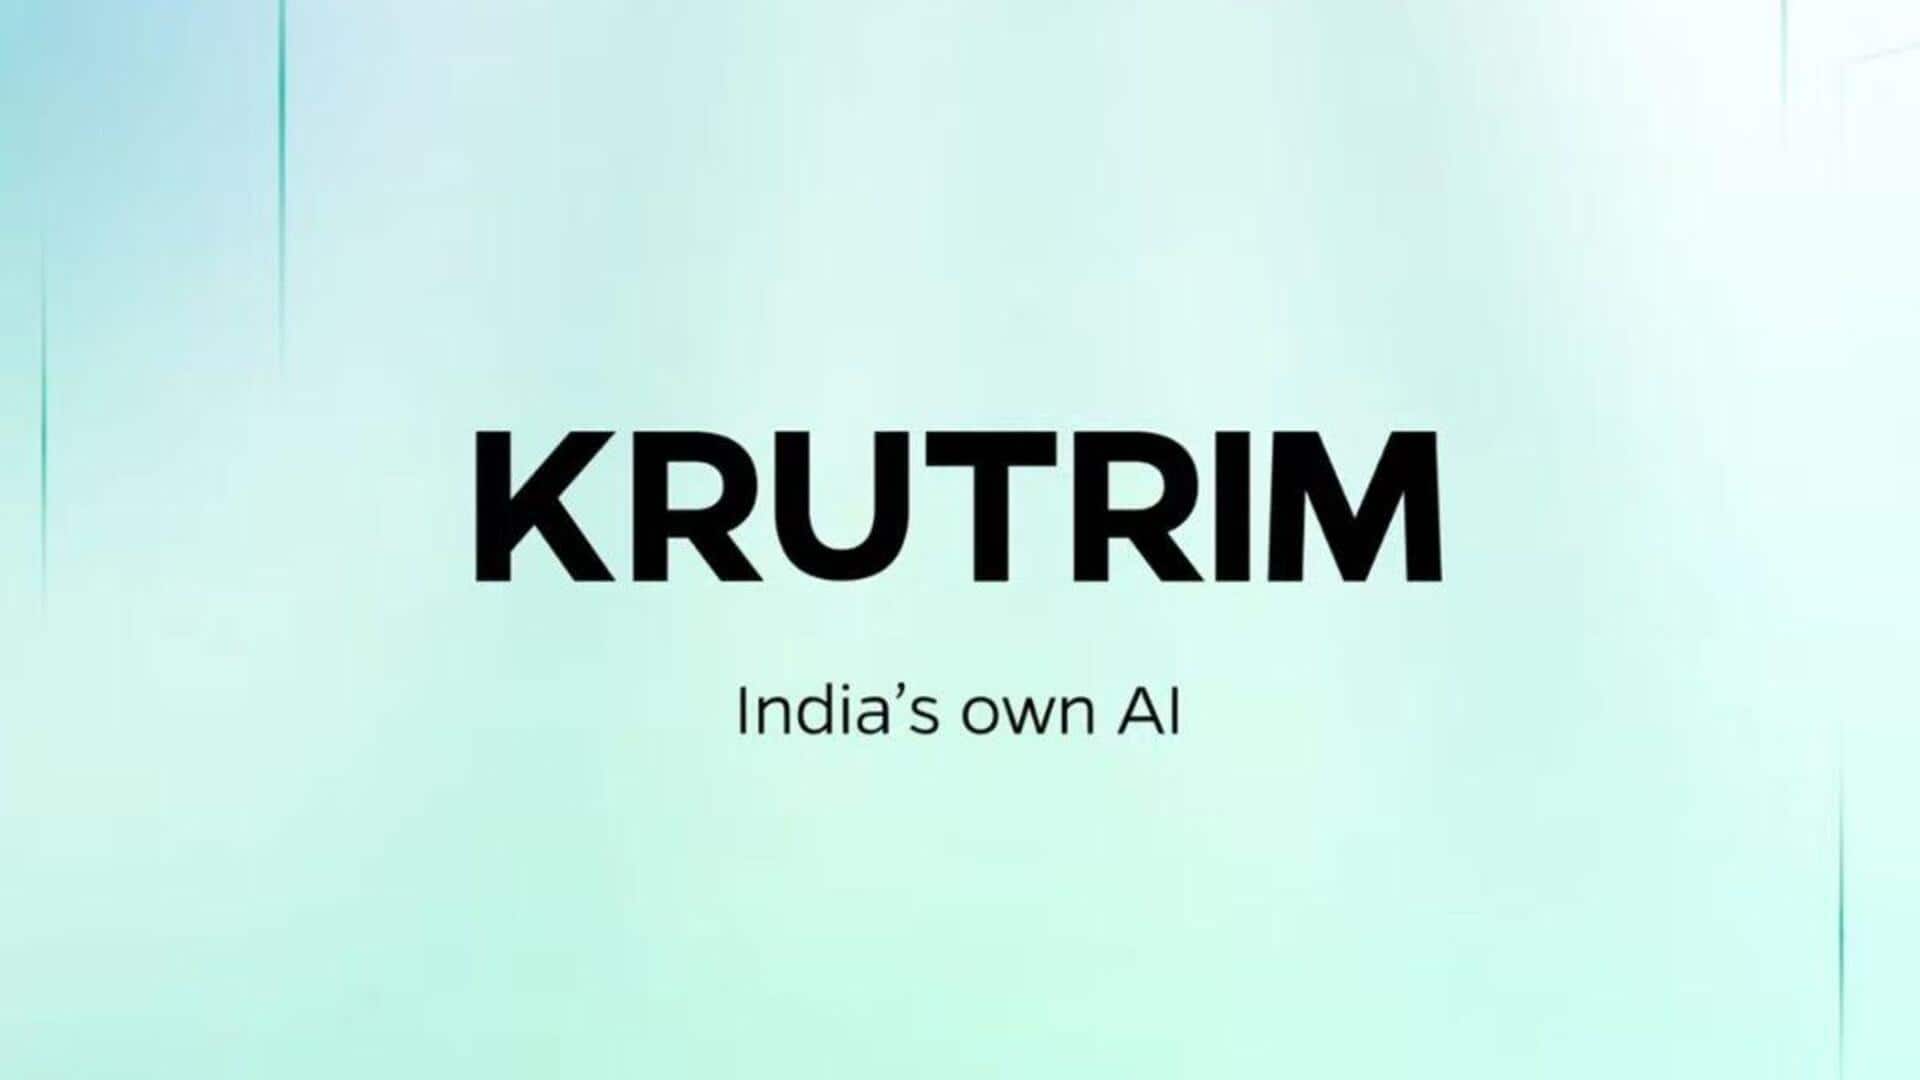 After Gemini, India's Krutrim AI chatbot faces flak for inaccuracy 